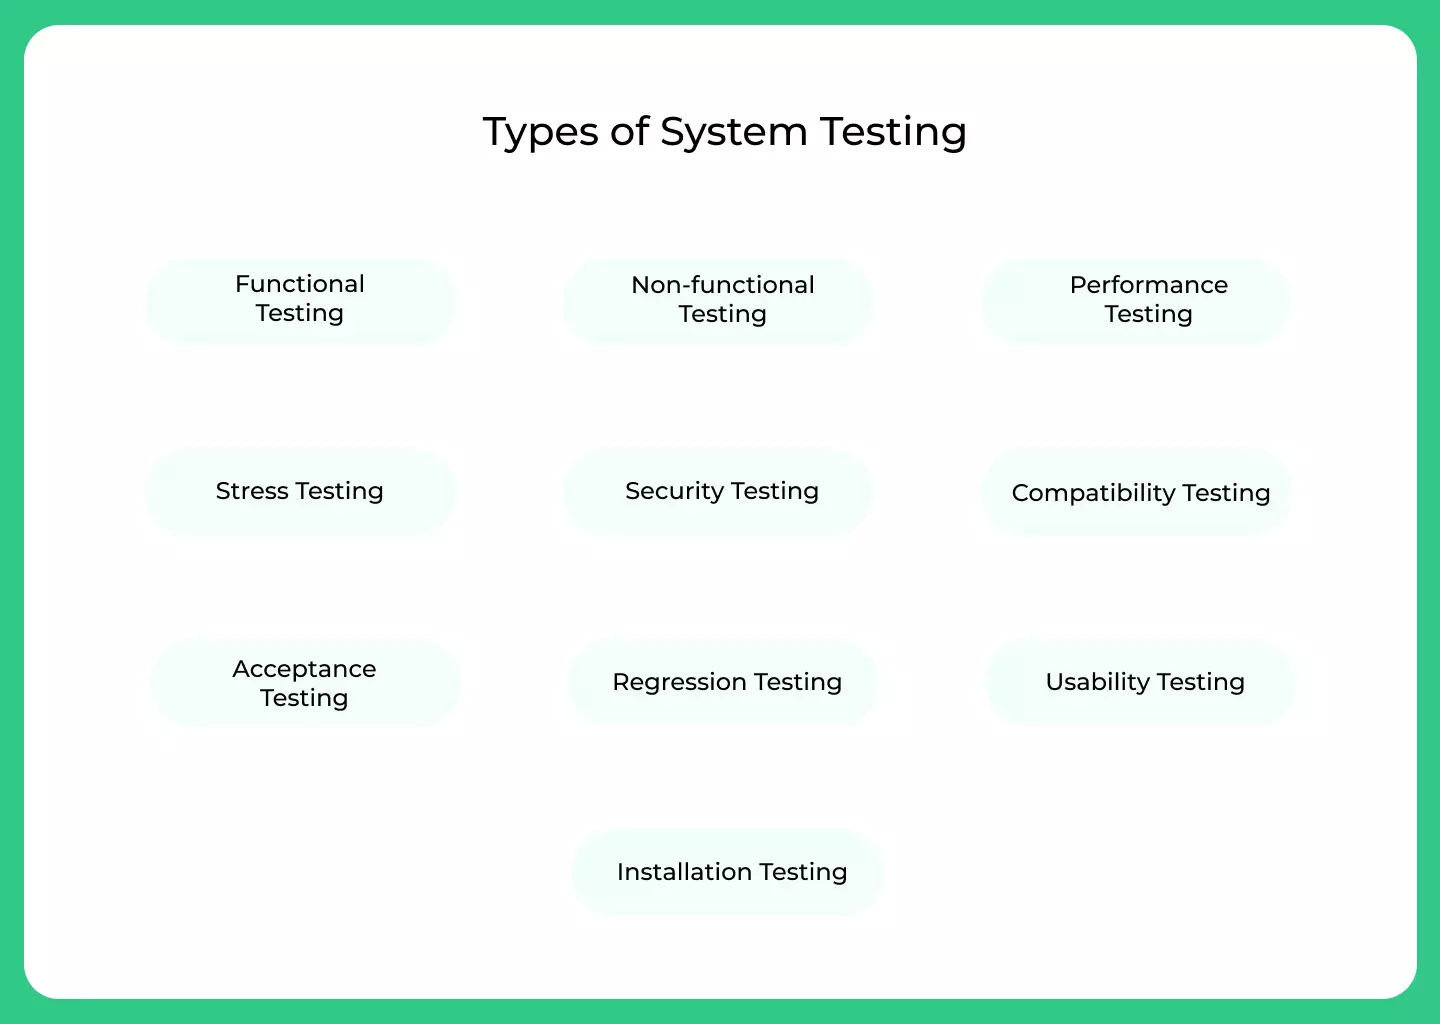 Types of System Testing